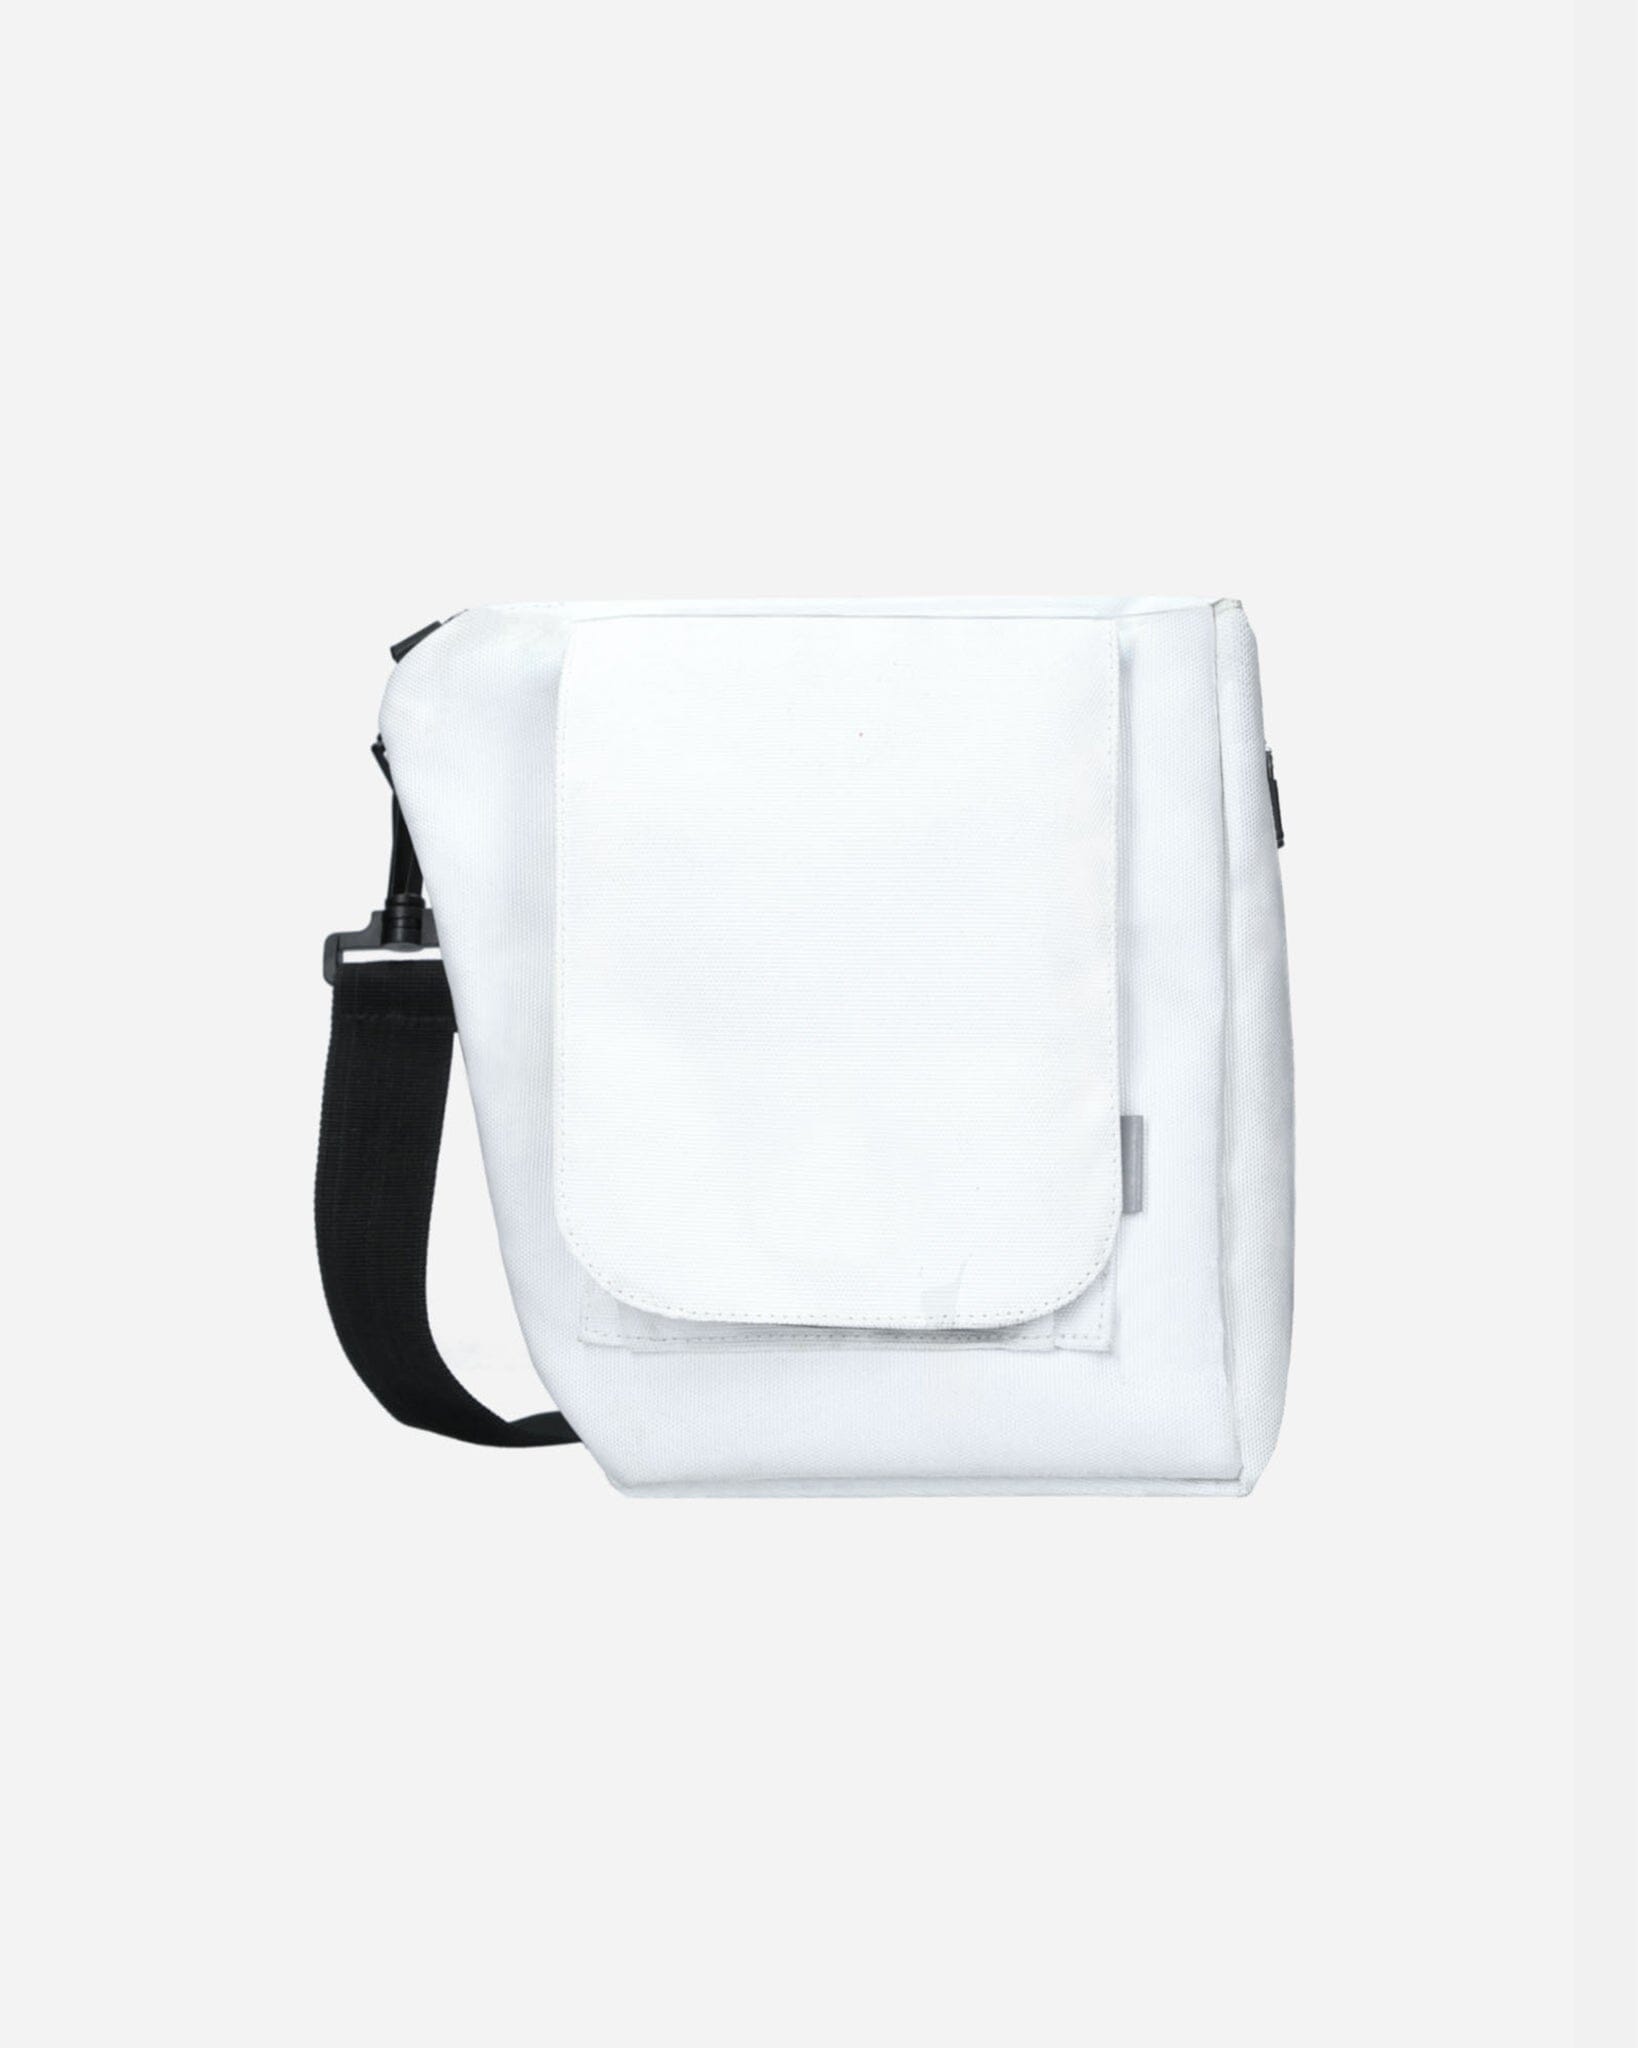 Small Carry - Storm Trooper Archive bolstr White Righty 